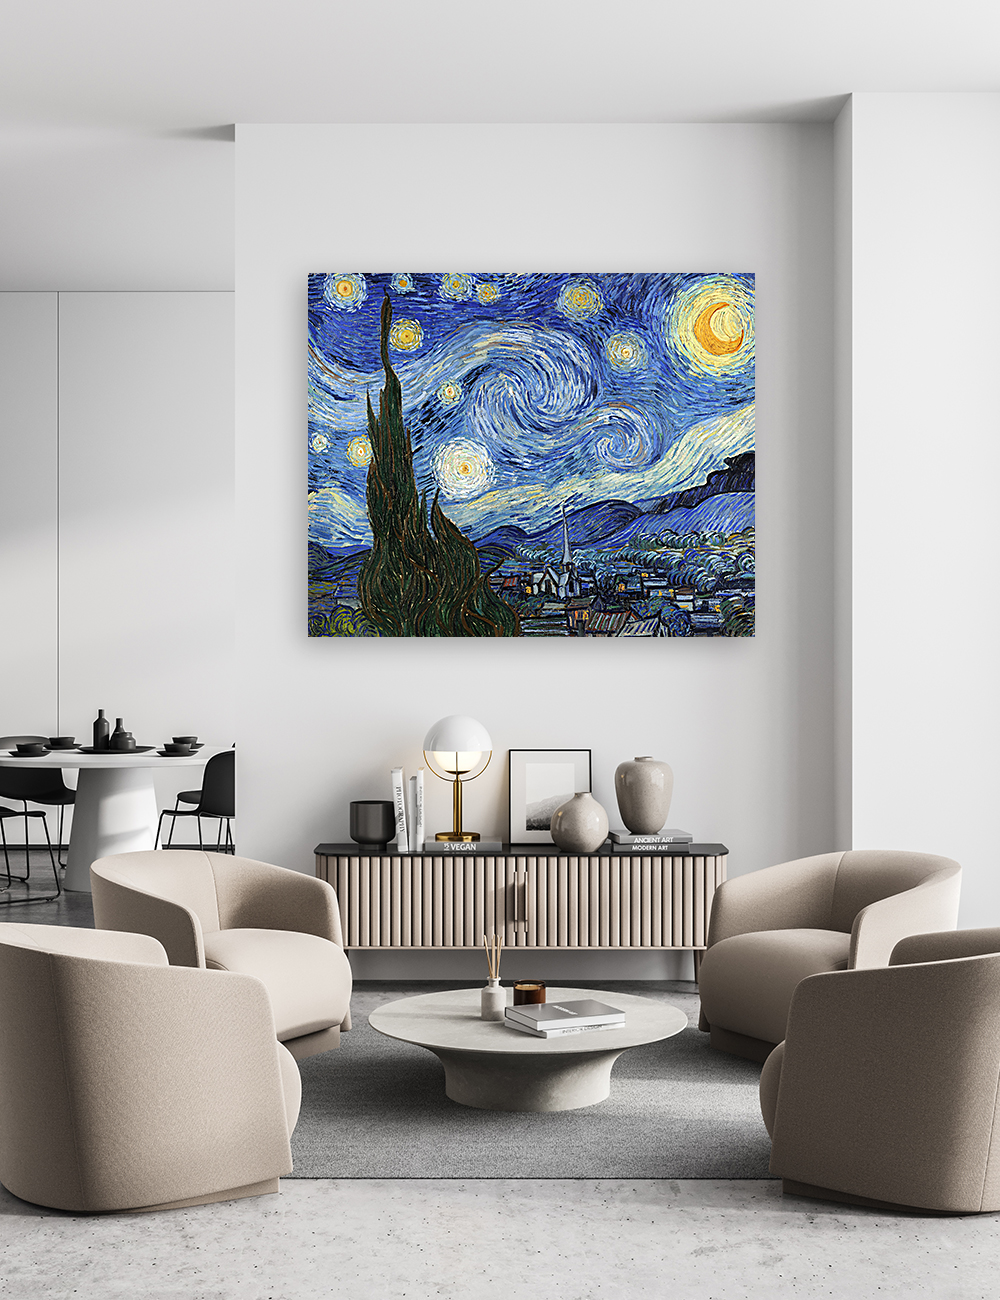 DECORARTS Starry Night by Vincent Van Gogh Art Reproduction. Giclee  Prints Acid Free Cotton Canvas Wall Art for Home Decor W 40